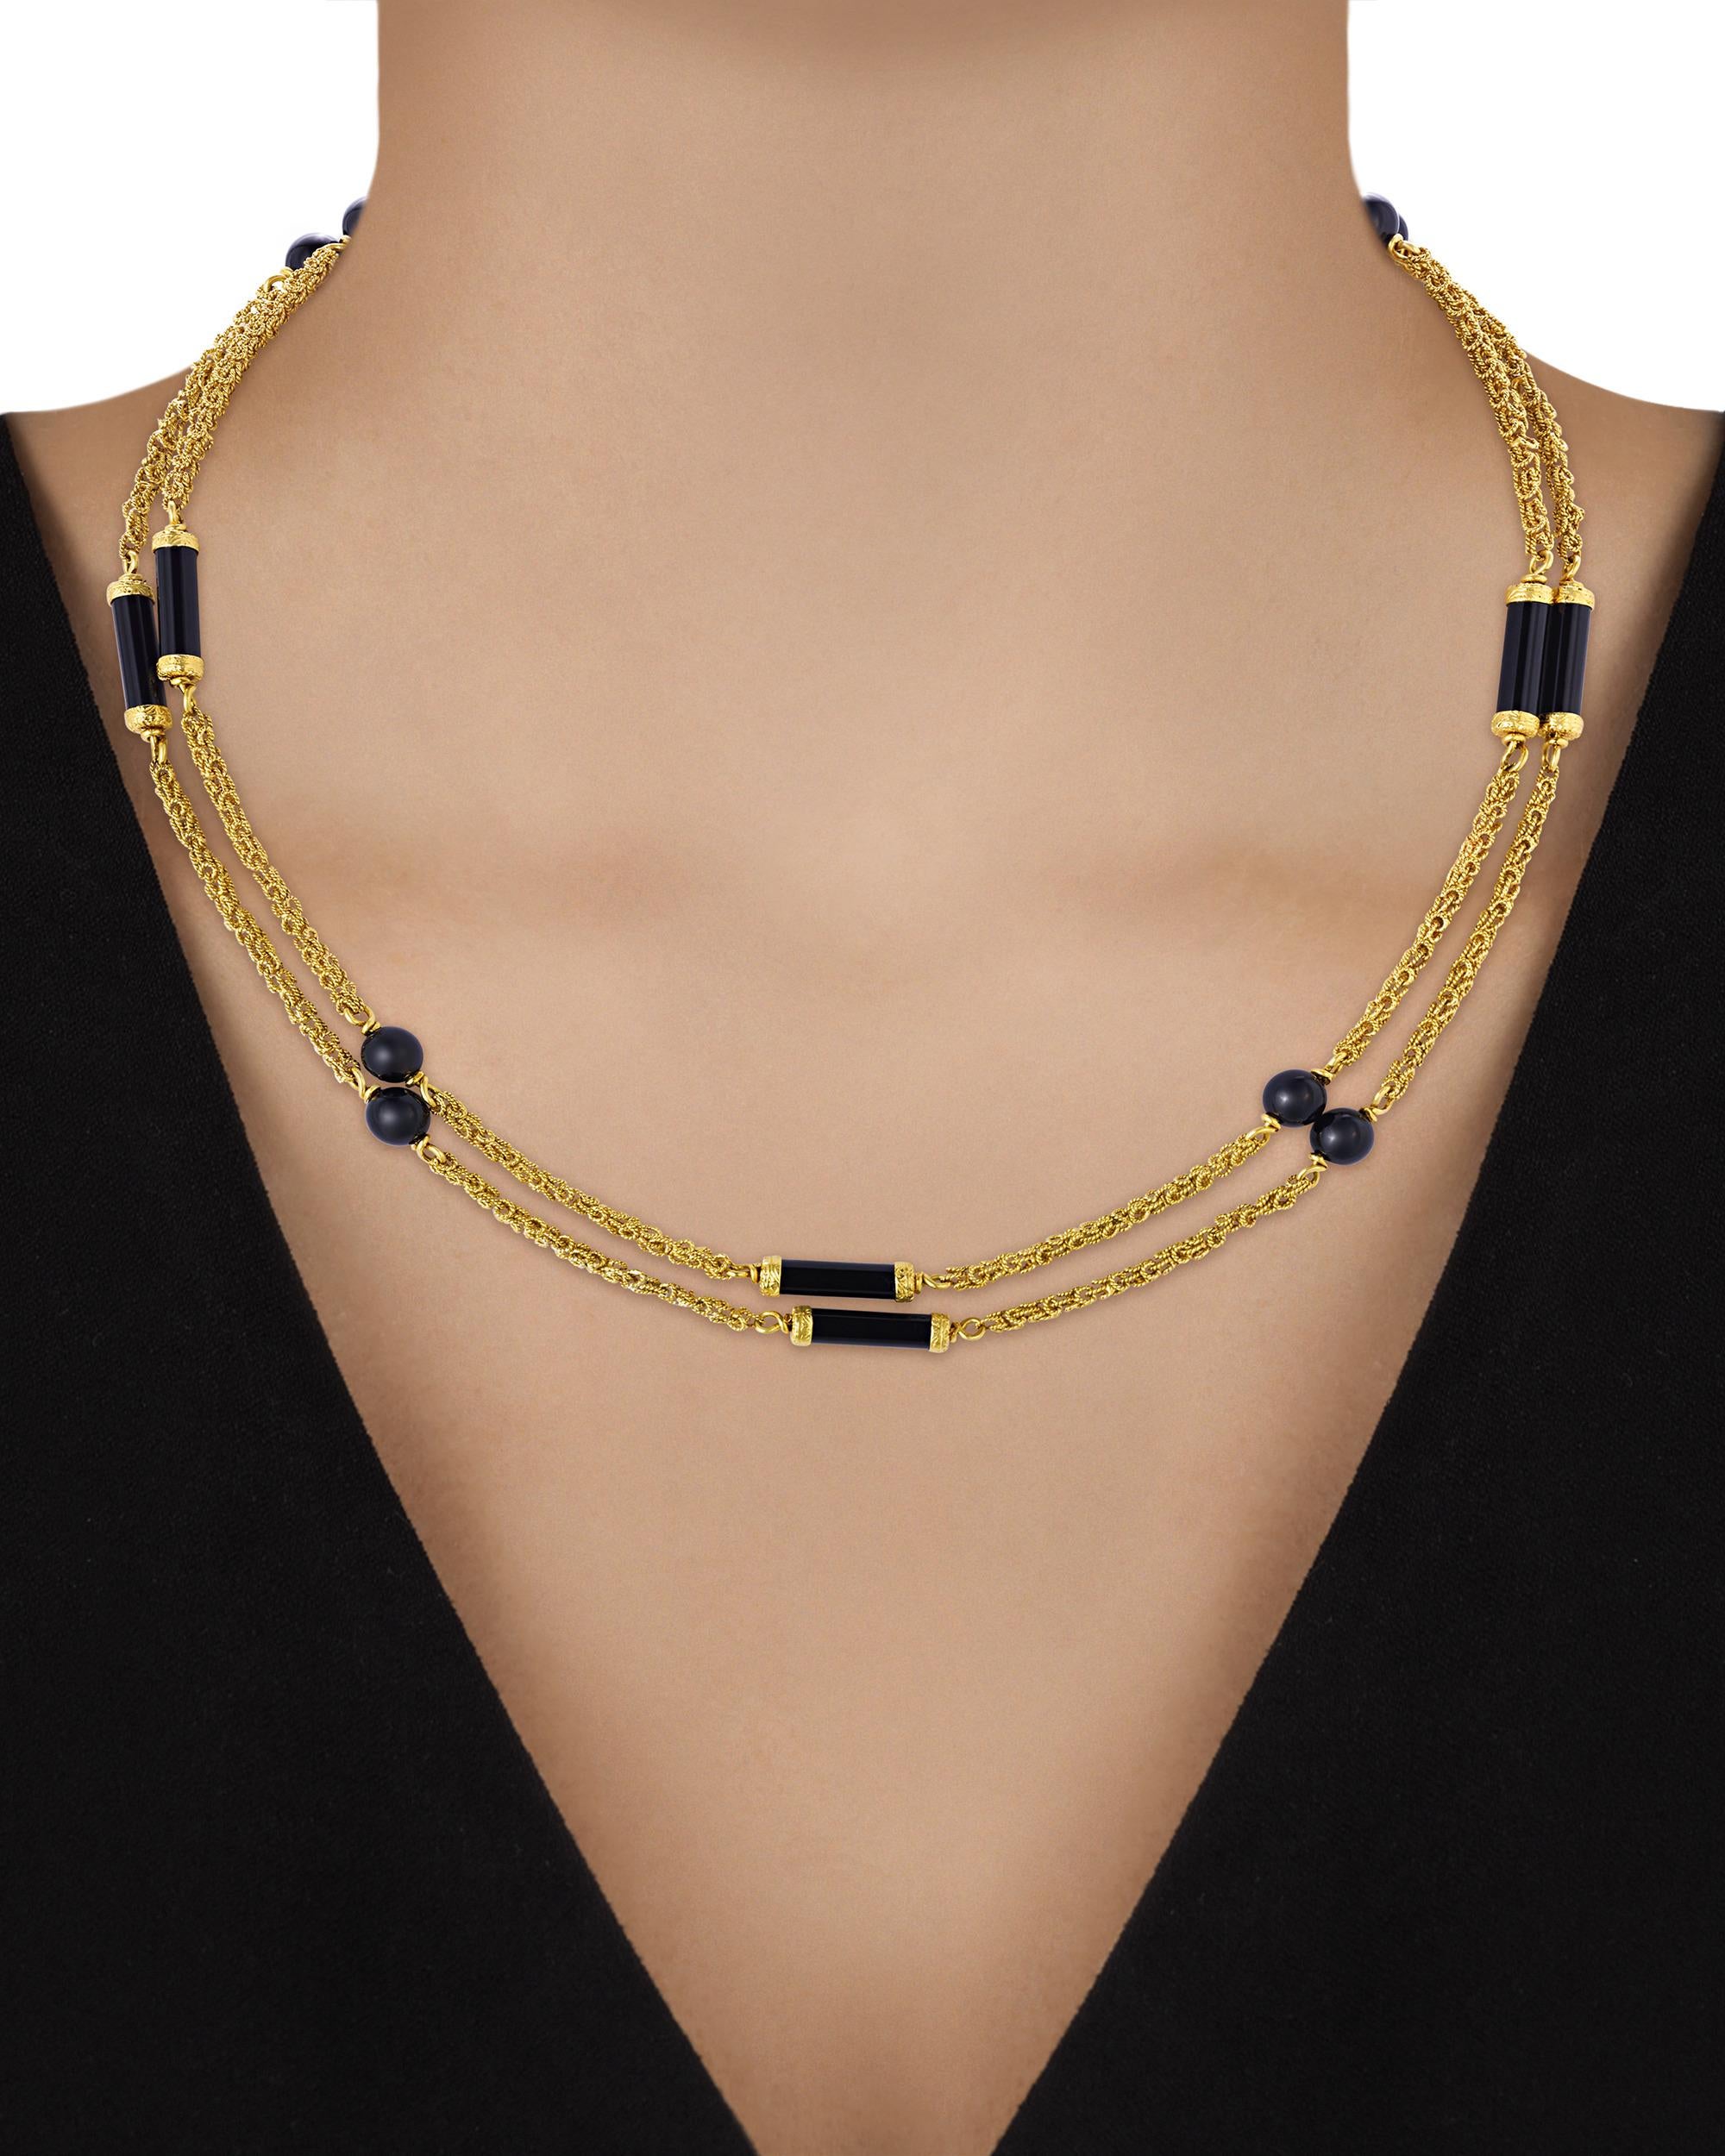 Striking and refined, this necklace from esteemed French jeweler Boucheron is crafted from 18K yellow gold and onyx. Spherical onyx beads alternate with elegant onyx rondels along a lustrous 18K gold chain, creating a unique and sophisticated look.